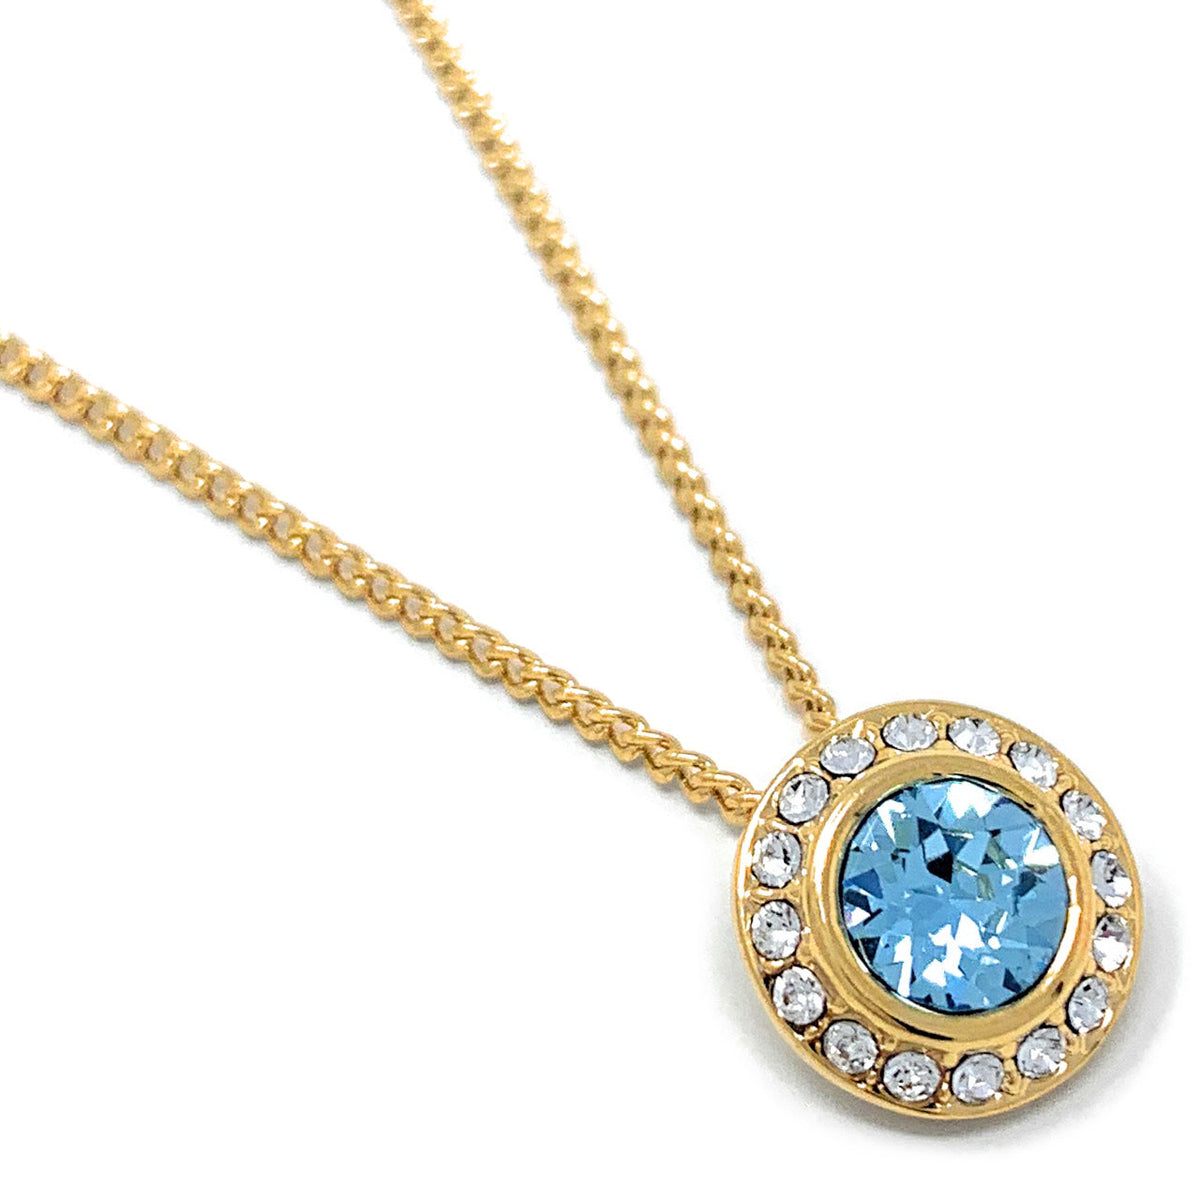 Halo Pave Pendant Necklace with Blue Aquamarine Round Crystals from Swarovski Gold Plated - Ed Heart